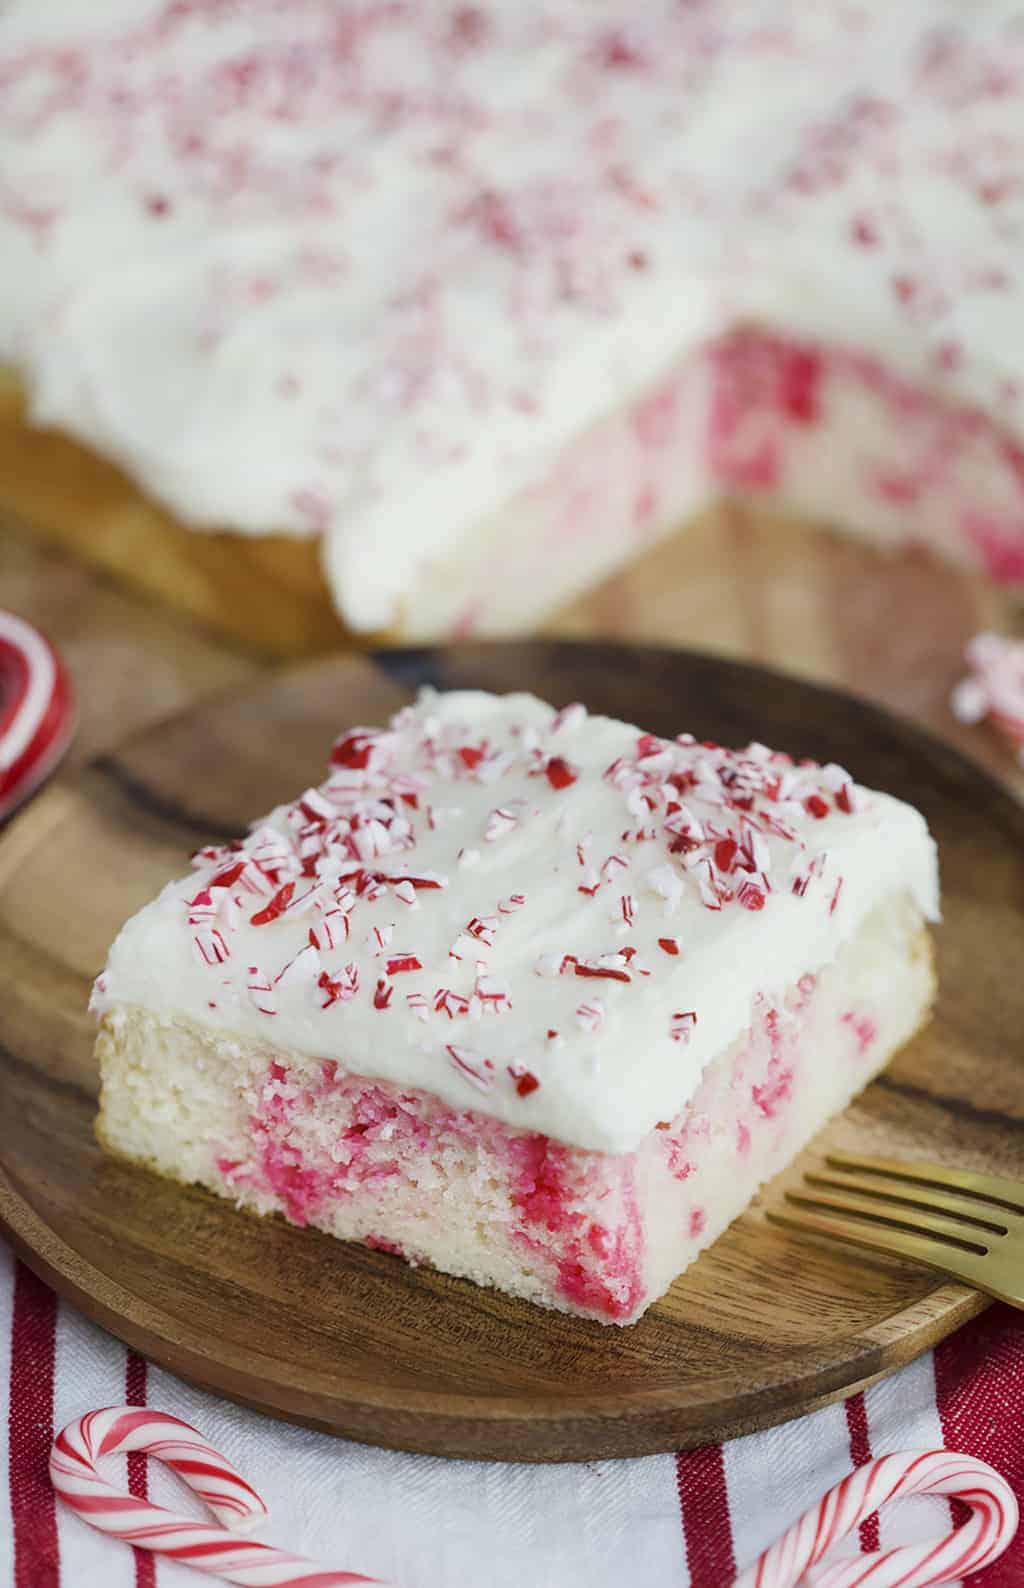 A photo showing a slice of Candy Cane Sheet Cake on a plate with crushed candy cane sprinkled on top.